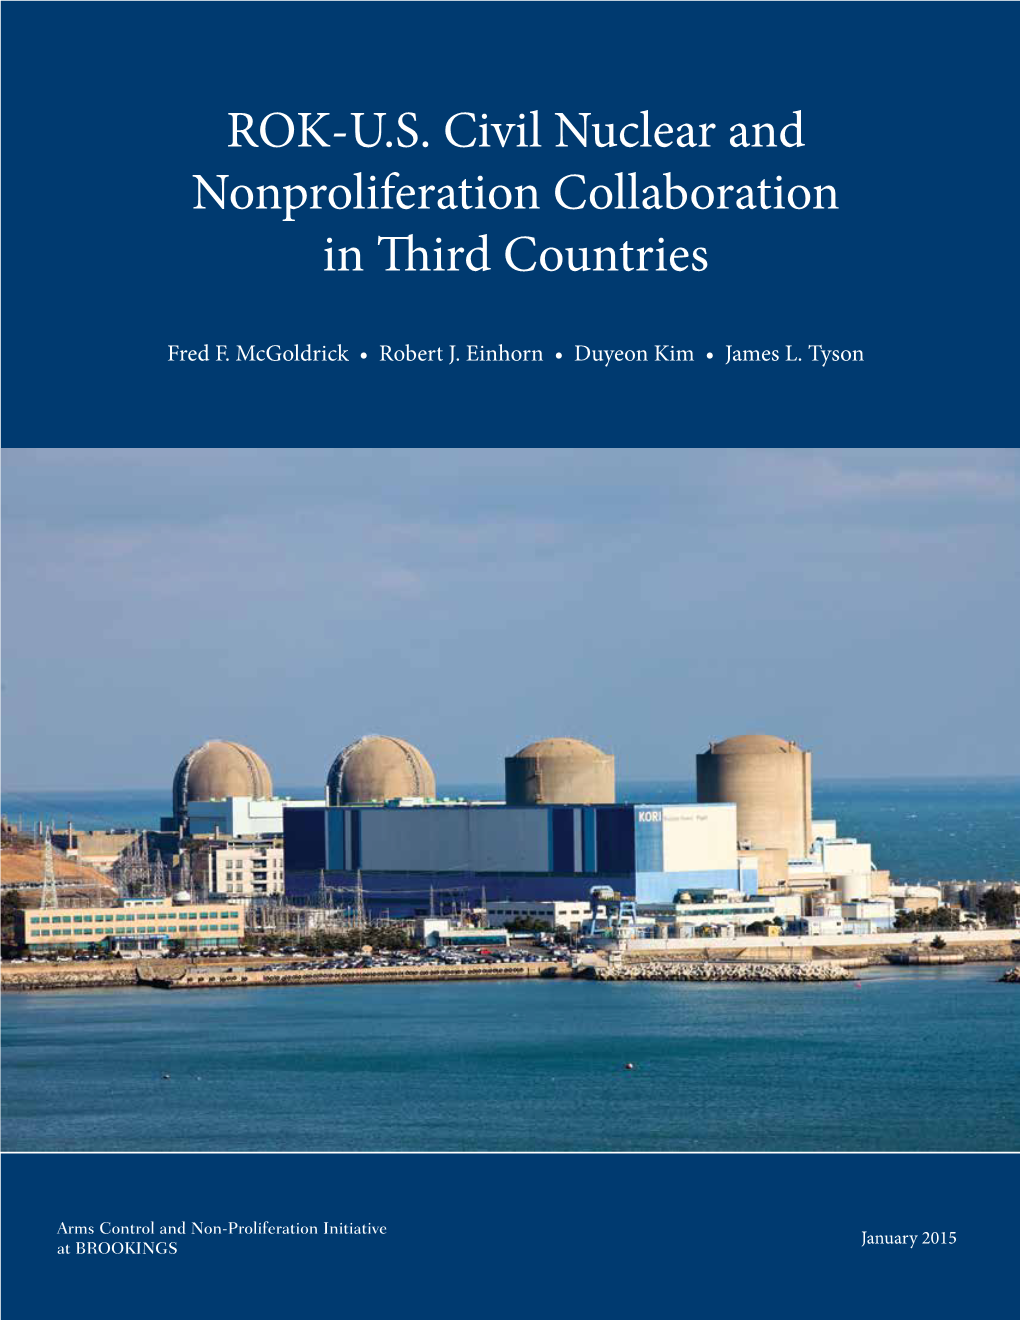 ROK-U.S. Civil Nuclear and Nonproliferation Collaboration in Third Countries